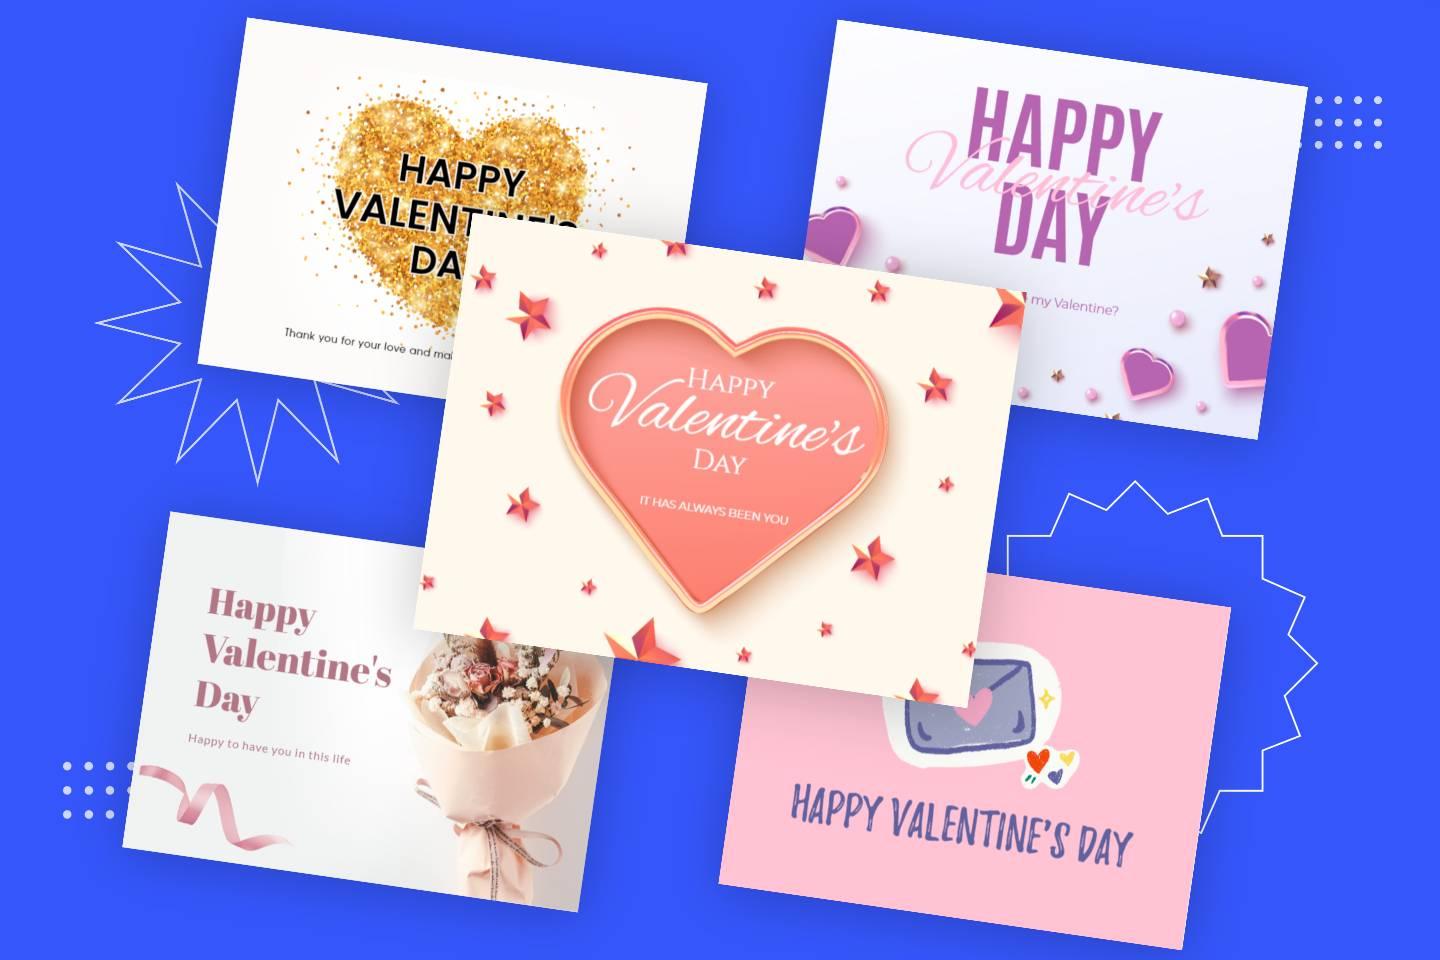 You're Too Sweet, Valentine's Day Cards, Free eCards